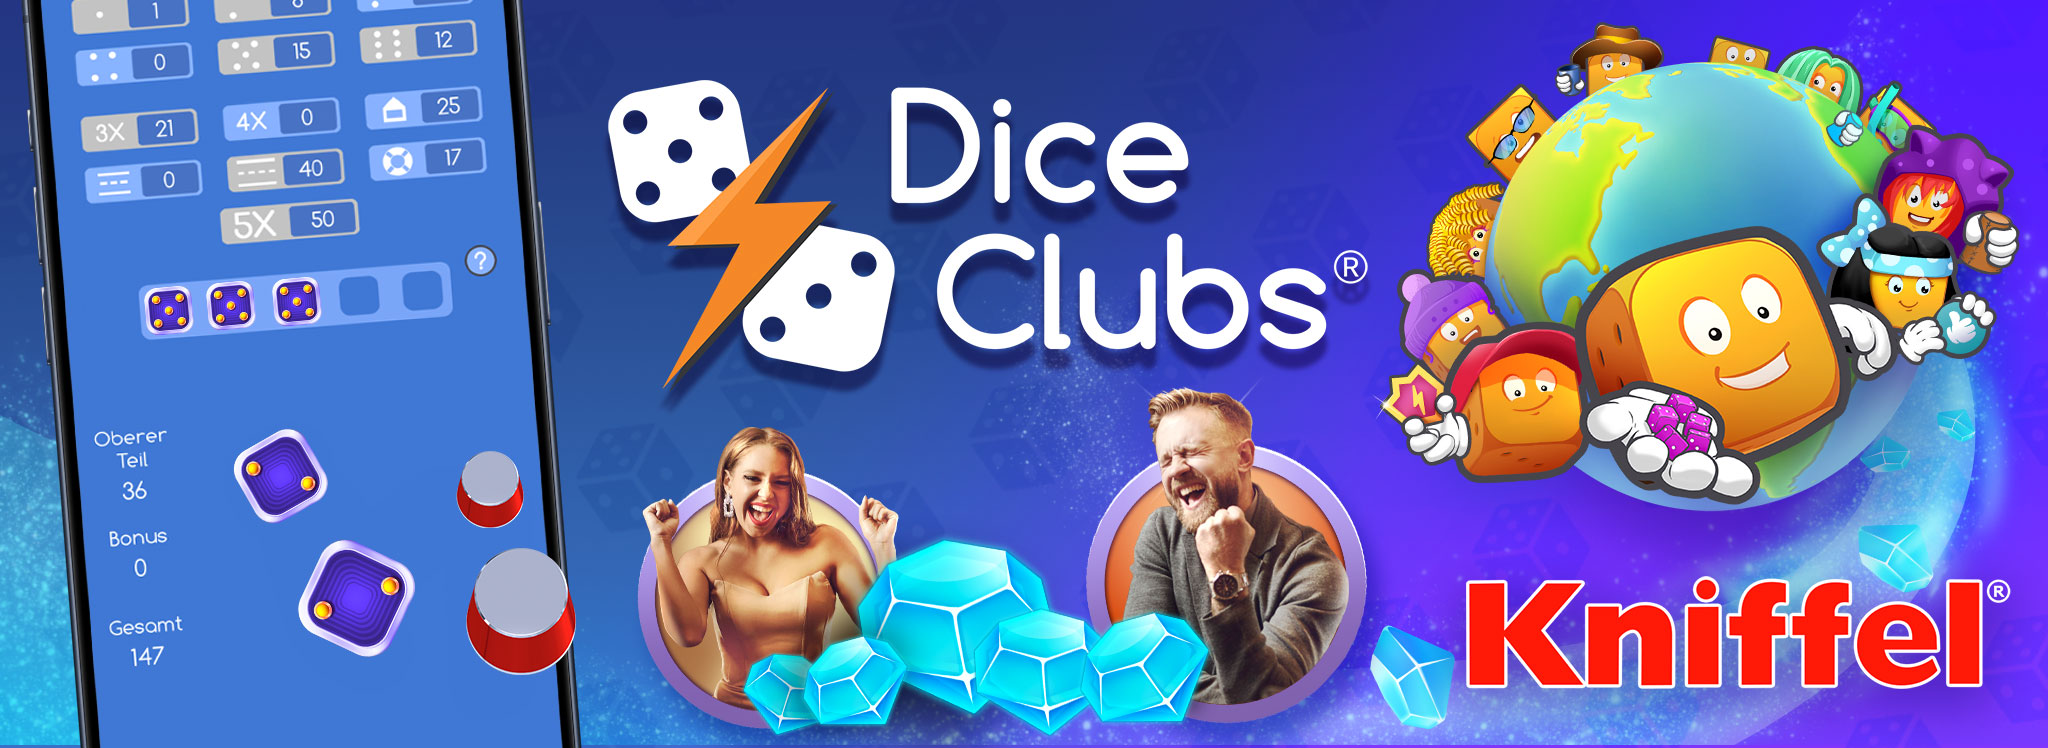 Kniffel Dice Clubs